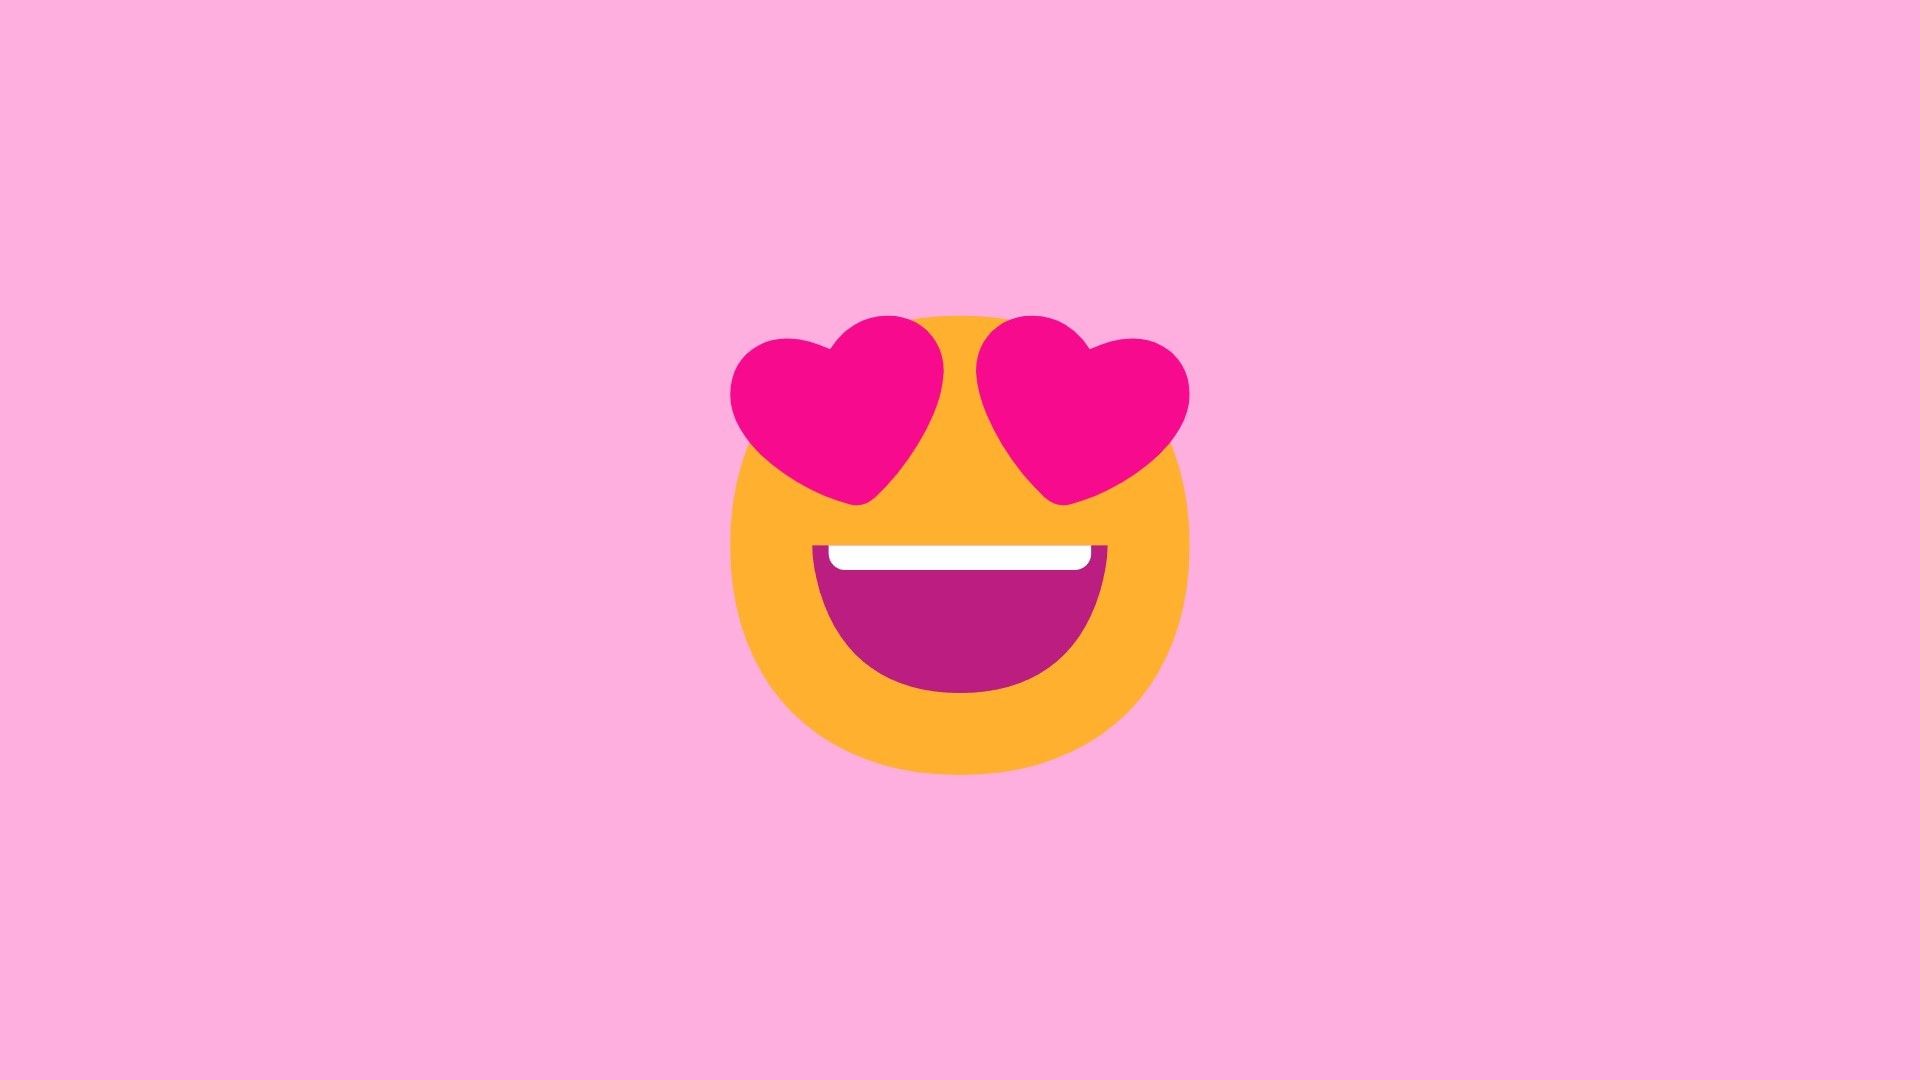 Emoji 9 smiling face with heart-eyes